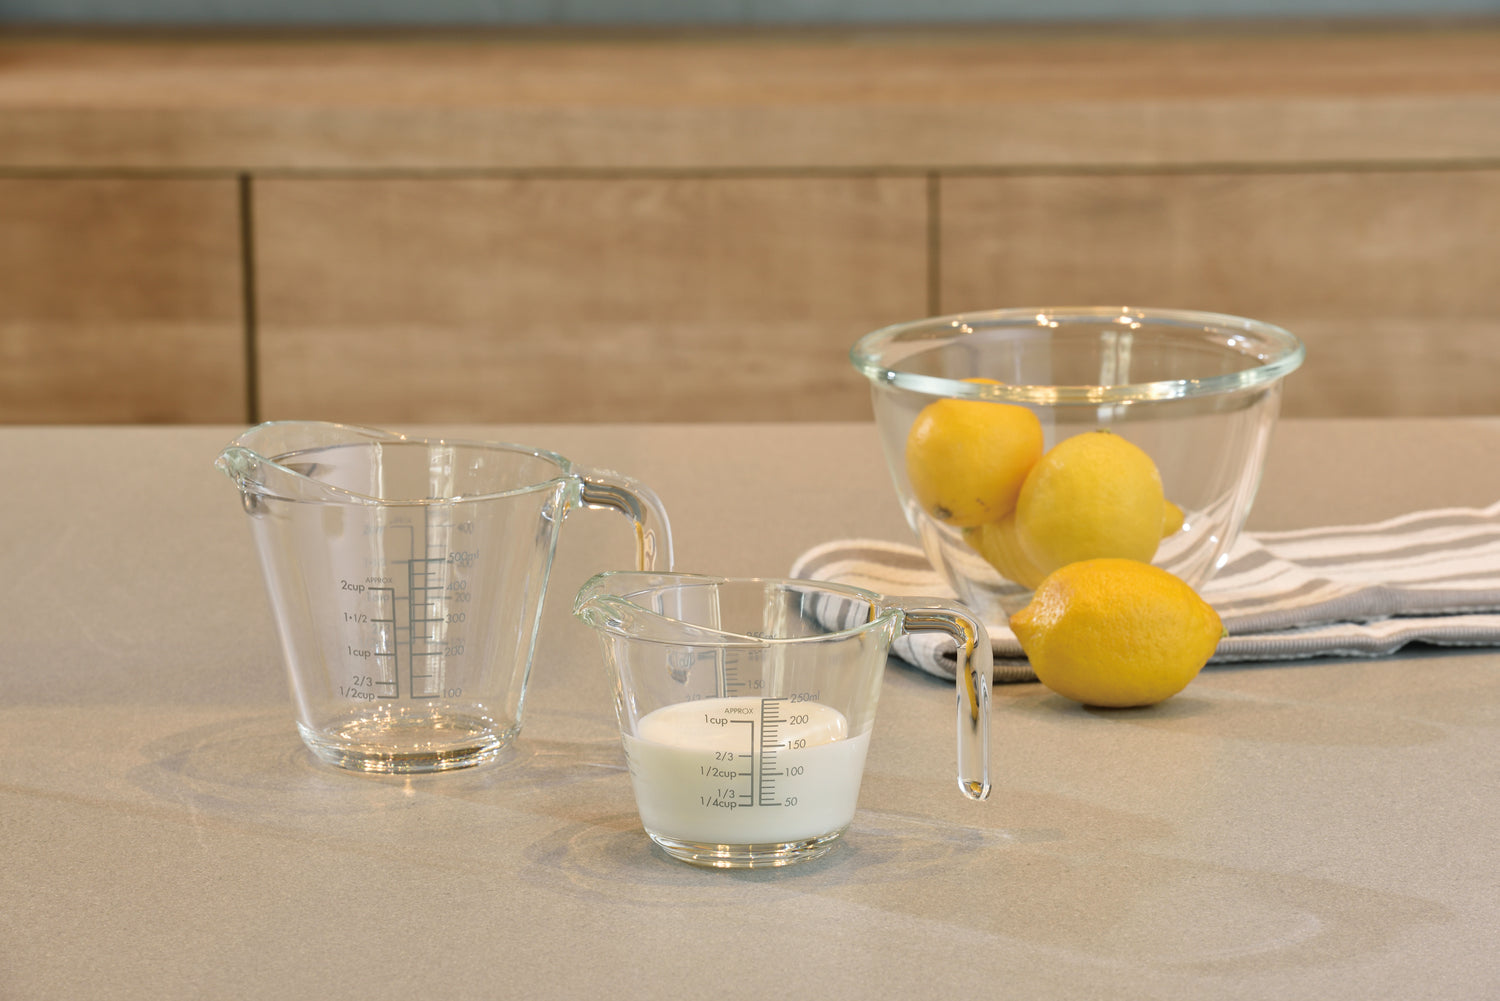 One and two cup sized thick glass measuring cups with glass handles and measurements on both the outside and inside of the glass on a table next to a glass mixing bowl with lemons inside and seated on a hand towel. Beside the towel is another lemon and the one cup measuring glass is filled two-thirds of the way with milk.